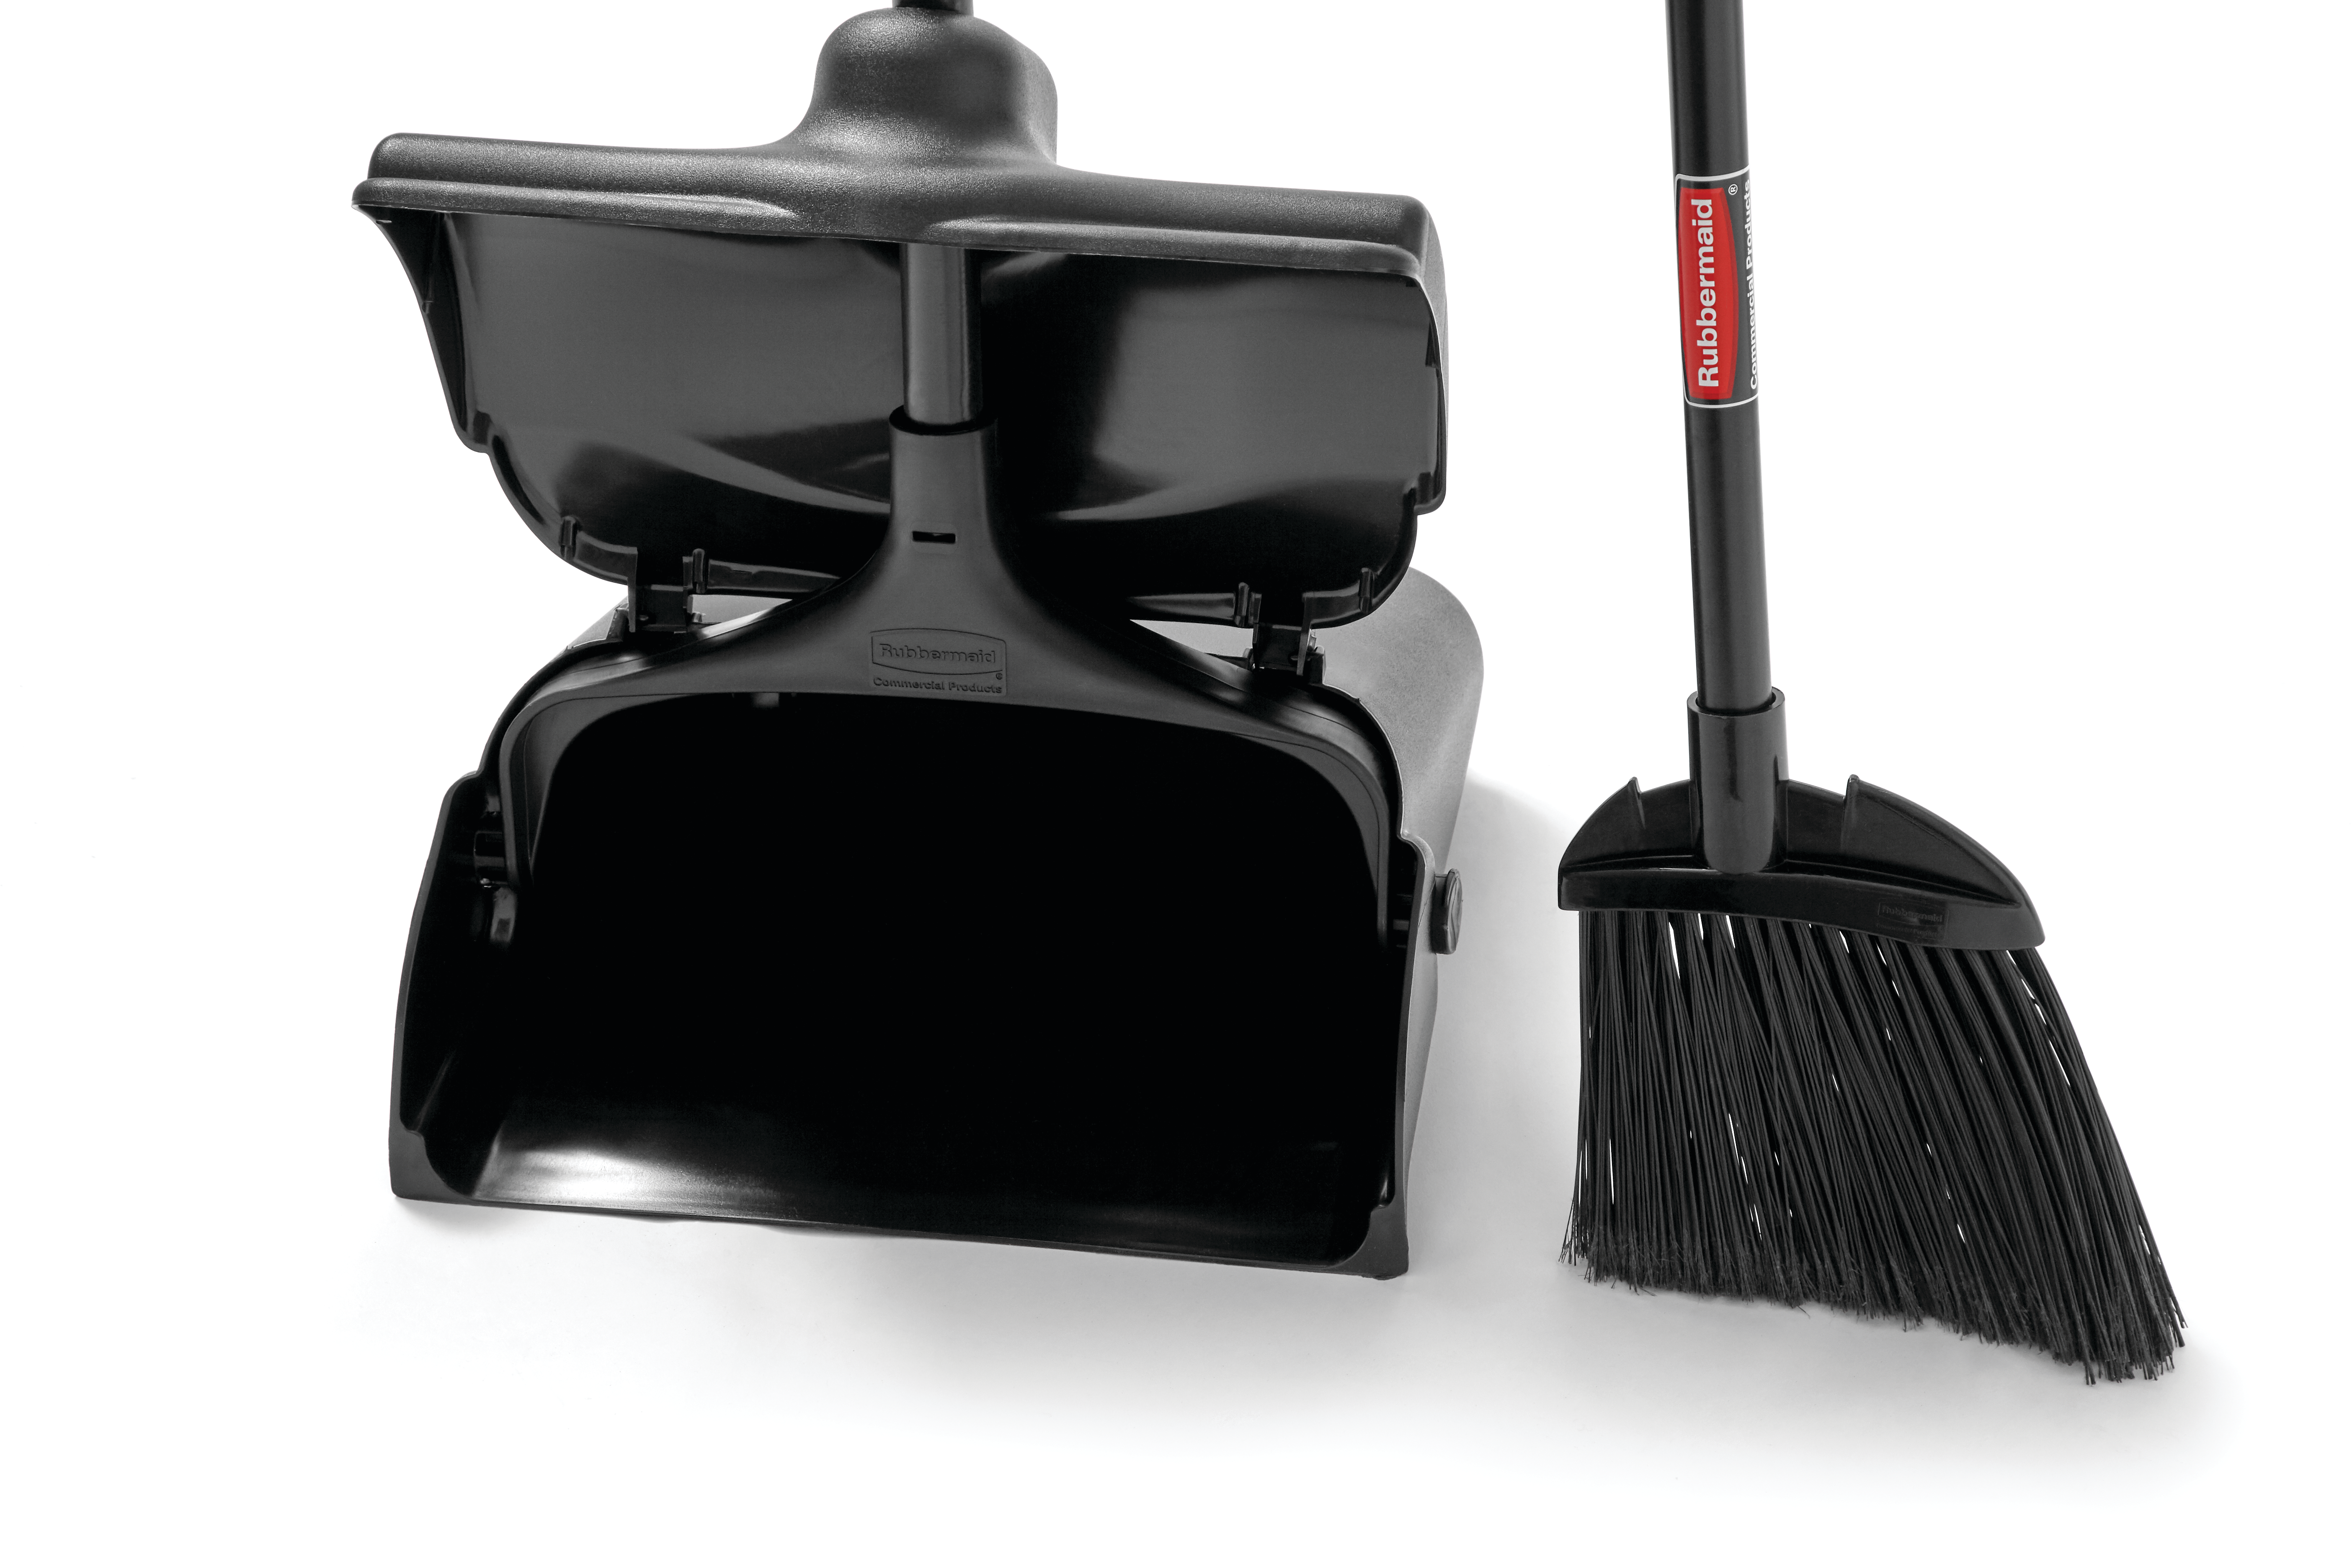 Brute Rubbermaid Executive Lobby Broom with Wood Handle - Impact